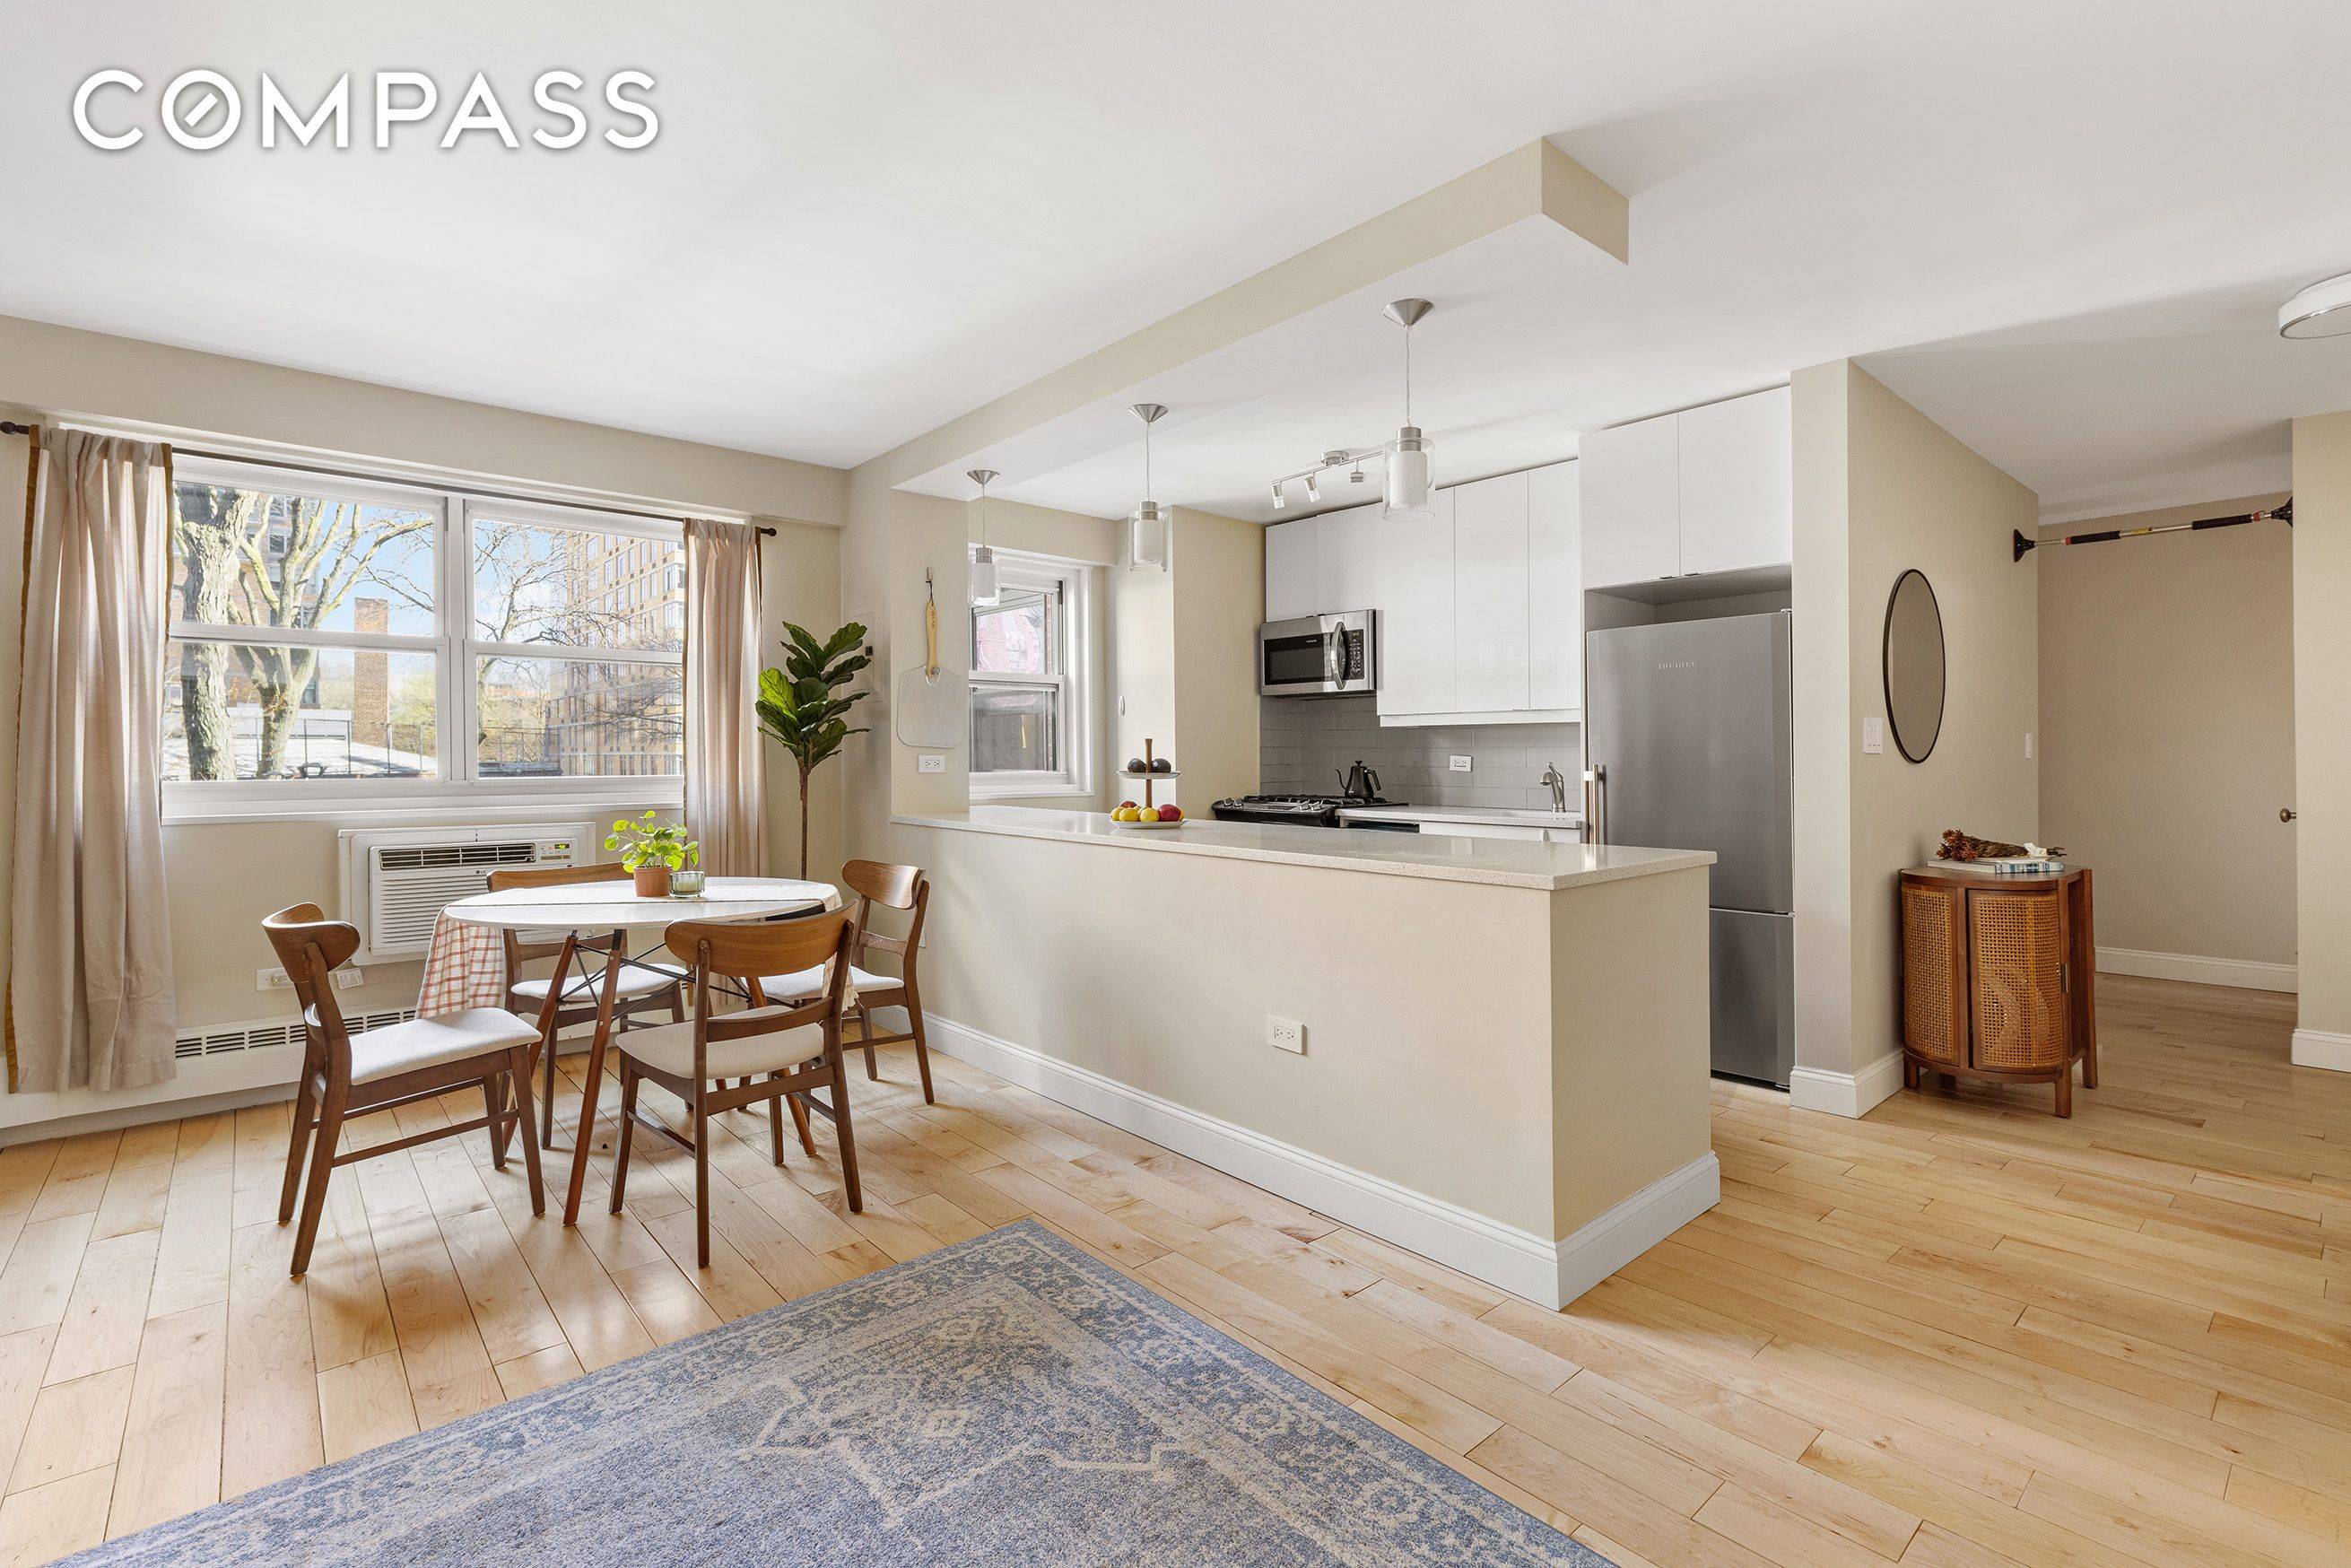 Located in the heart of Fort Greene, Brooklyn, this stunning one bedroom apartment has recently undergone a renovation and is a rare find within the highly desirable co op community ...